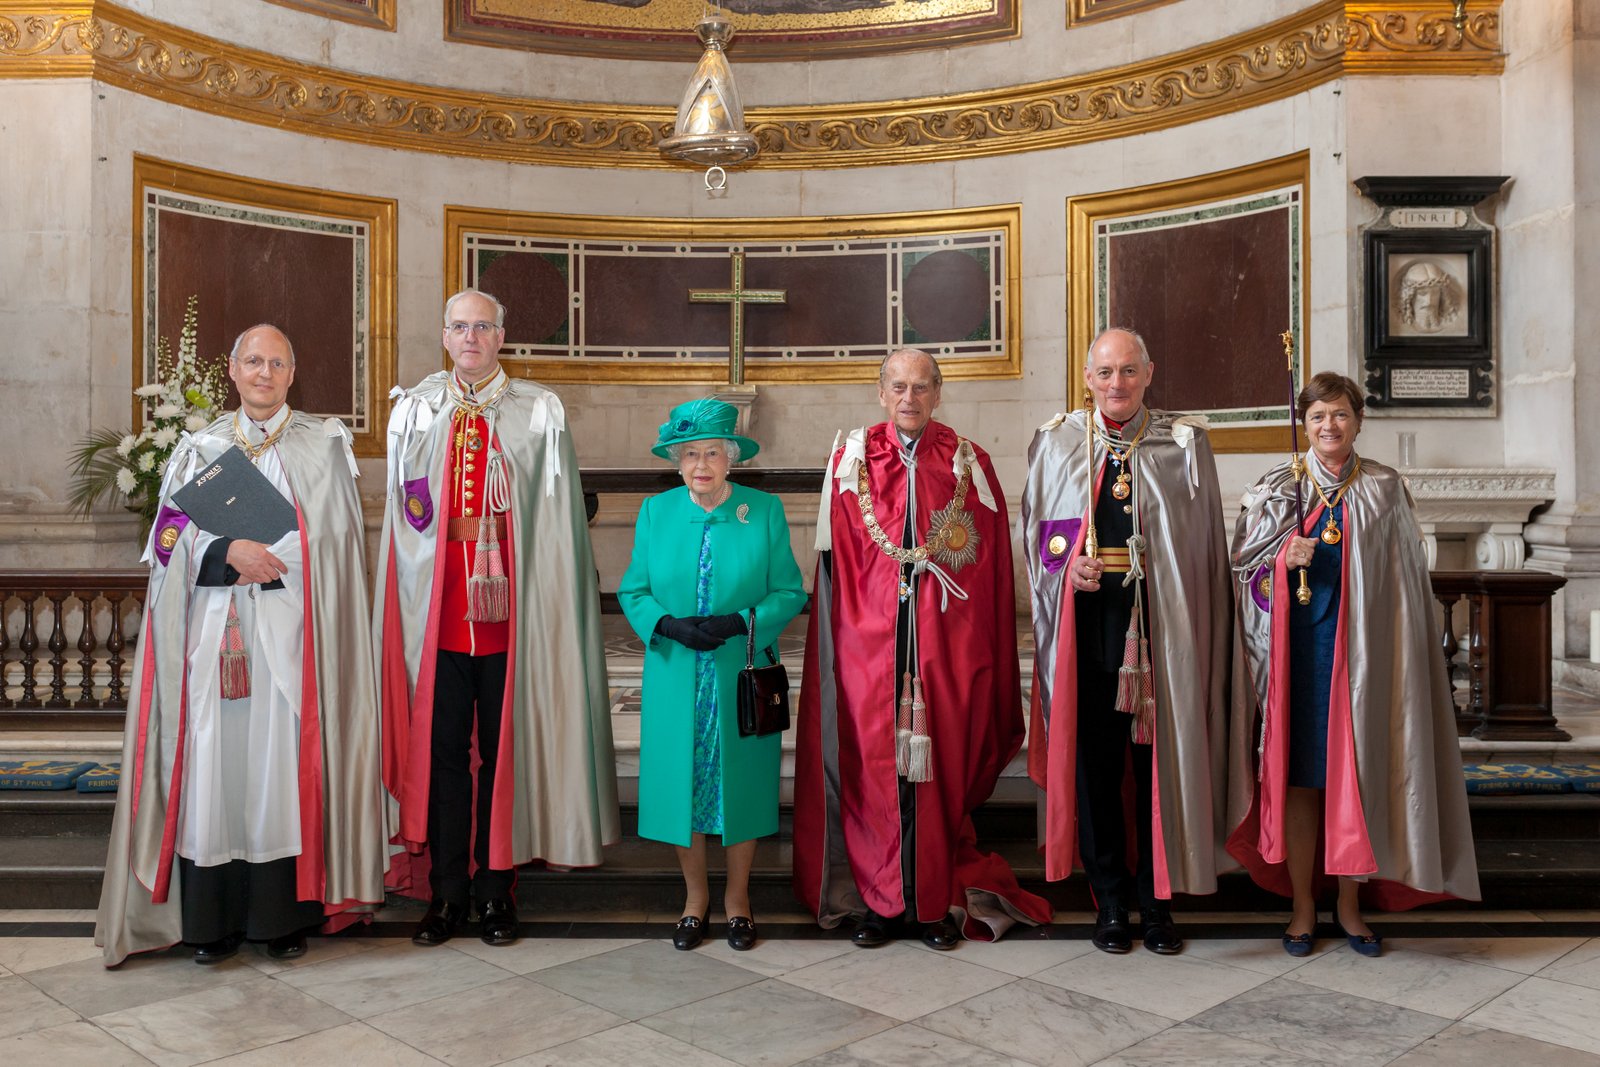 The Officials of the Order